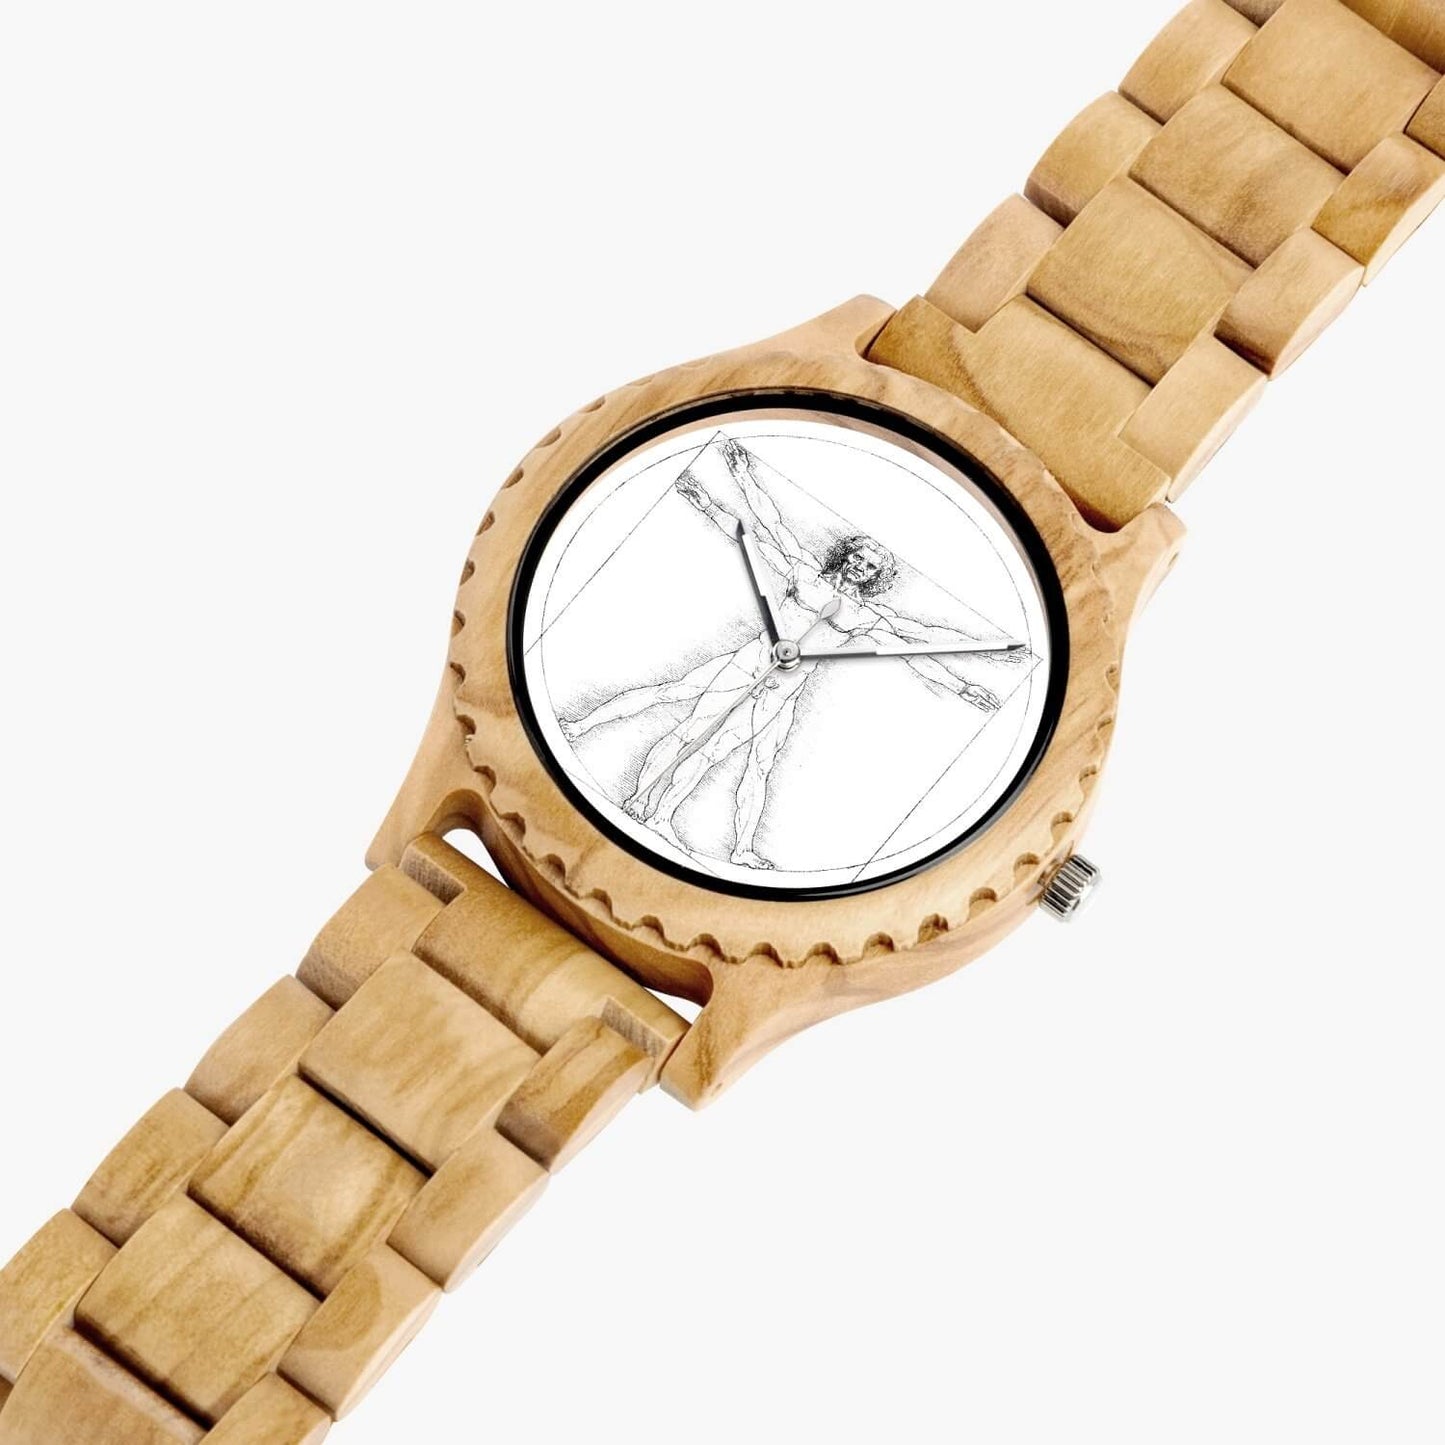 Italian Olive Lumber Wooden Watch Print on any thing USA/STOD clothes